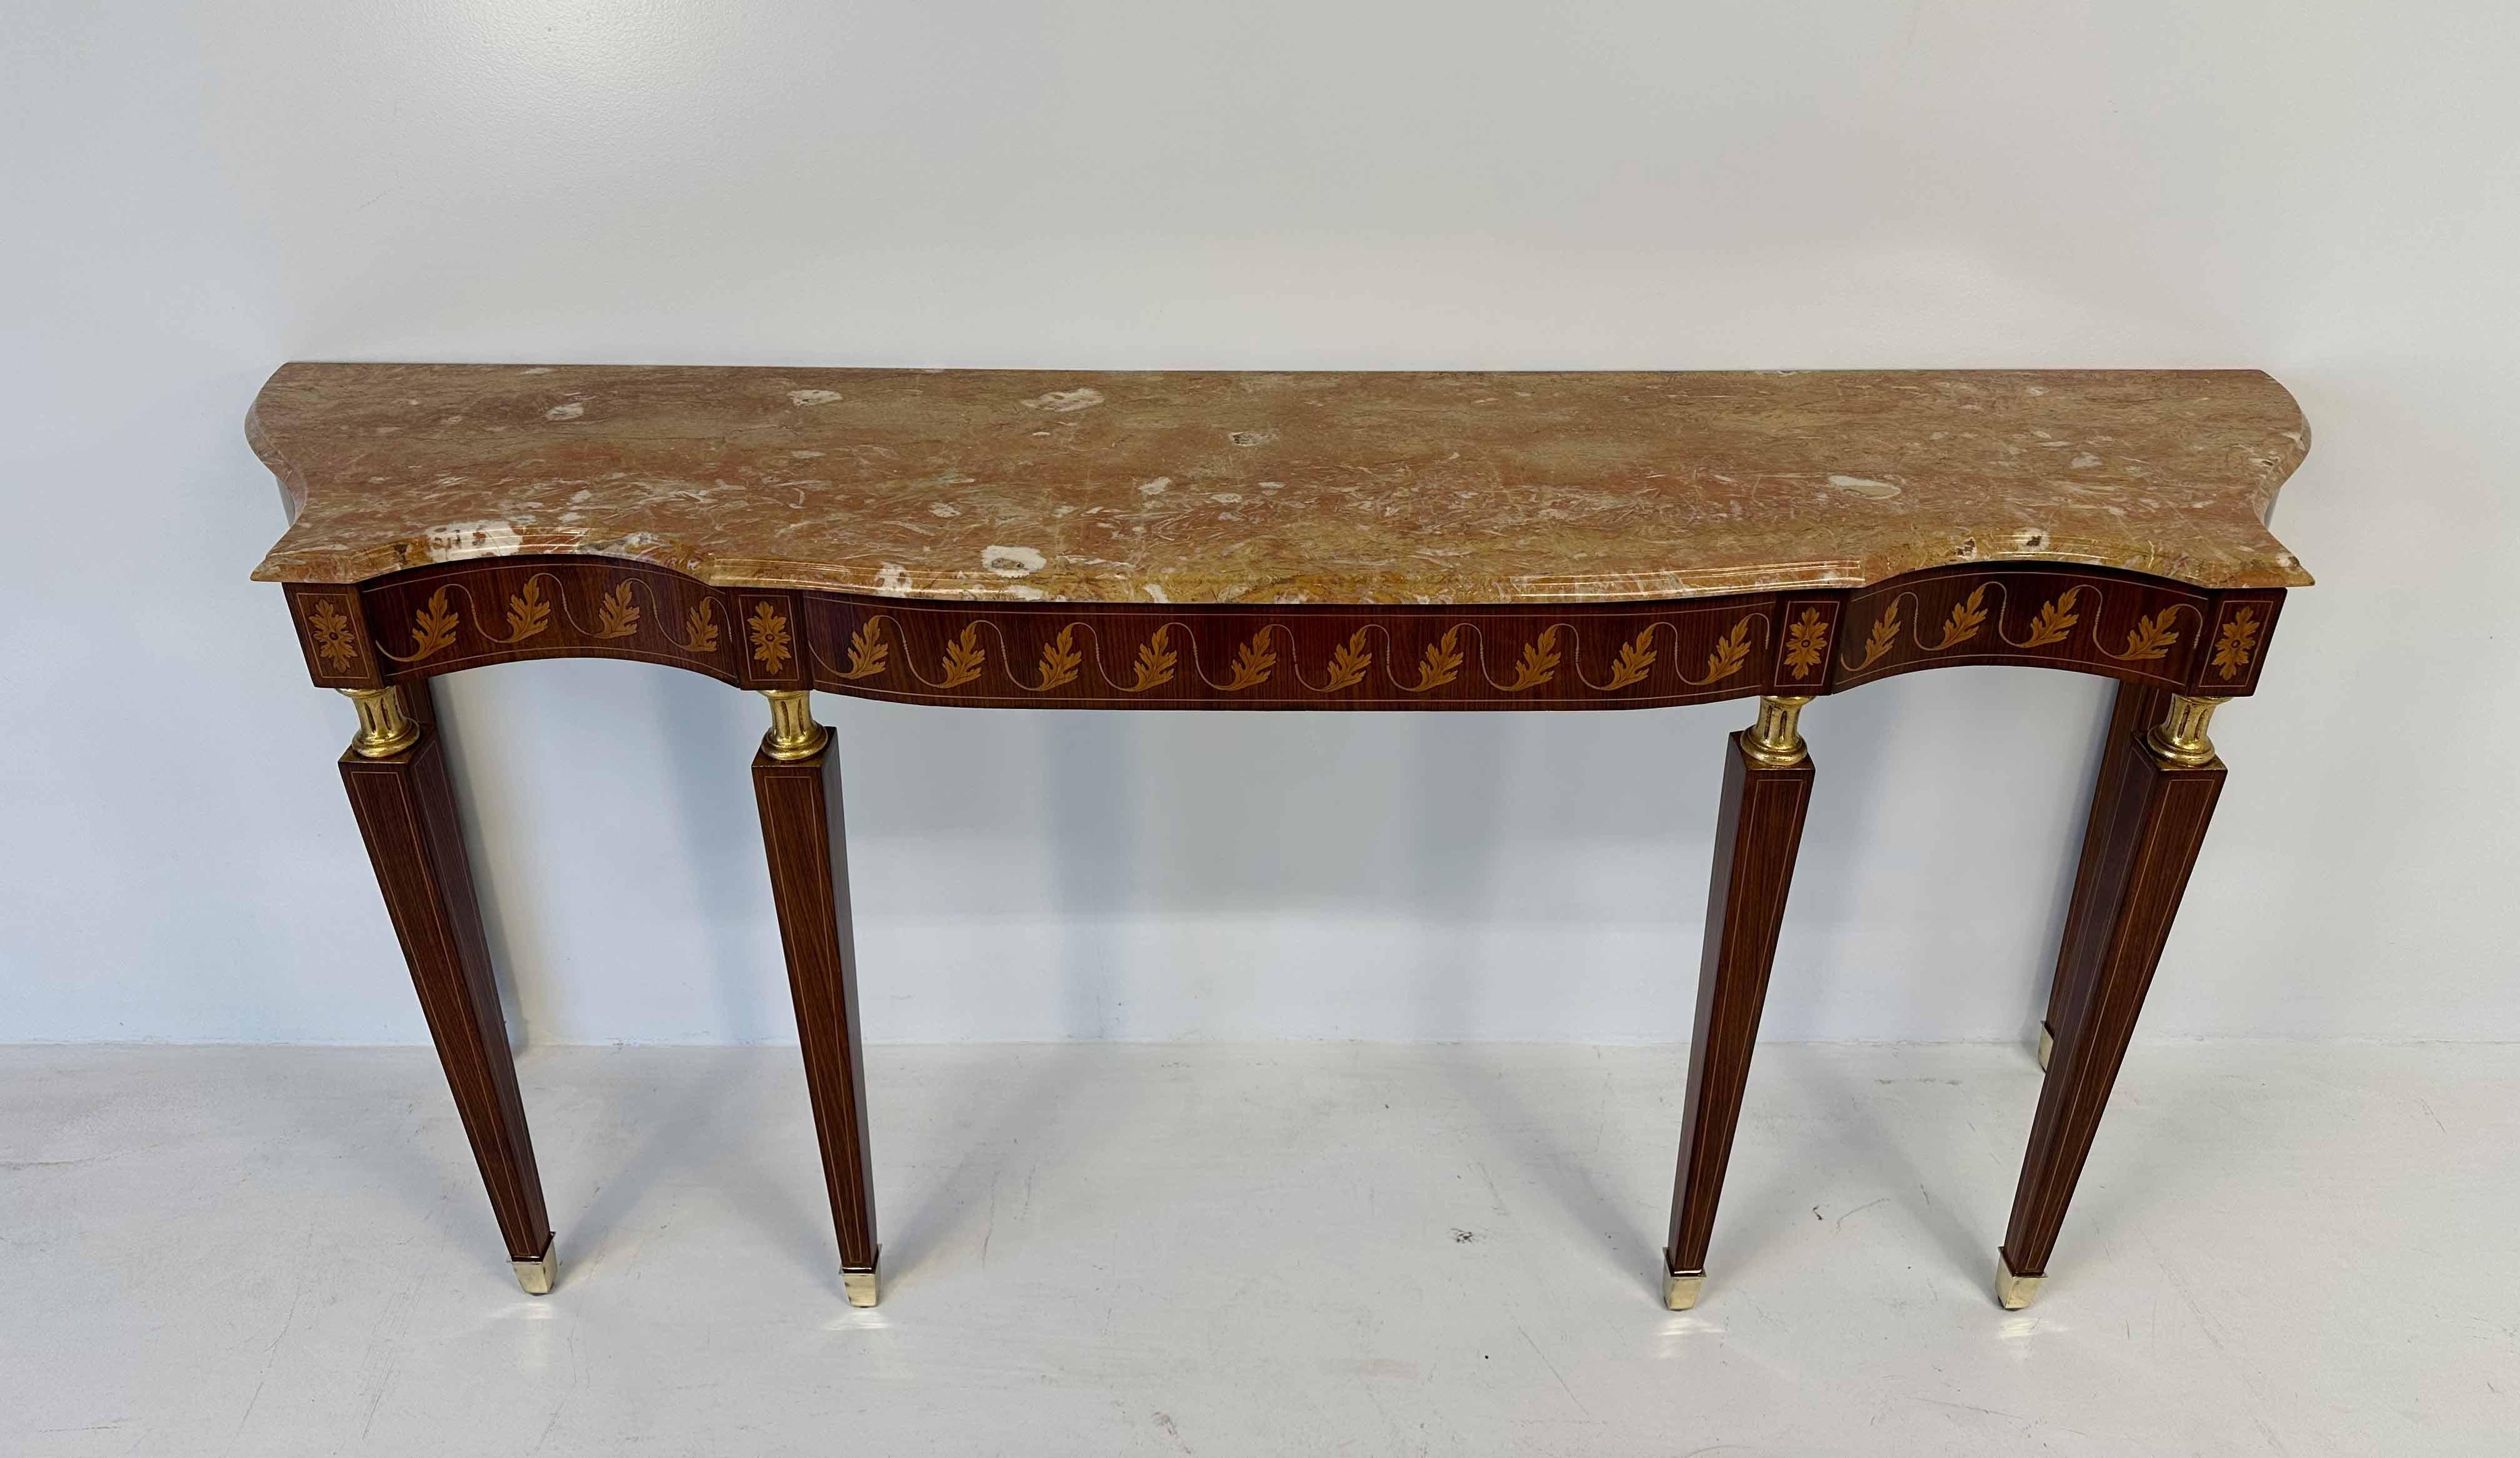 Brass Italian Art Deco Marble and Inlaid Wood Console, Attr. to Paolo Buffa, 1950s For Sale